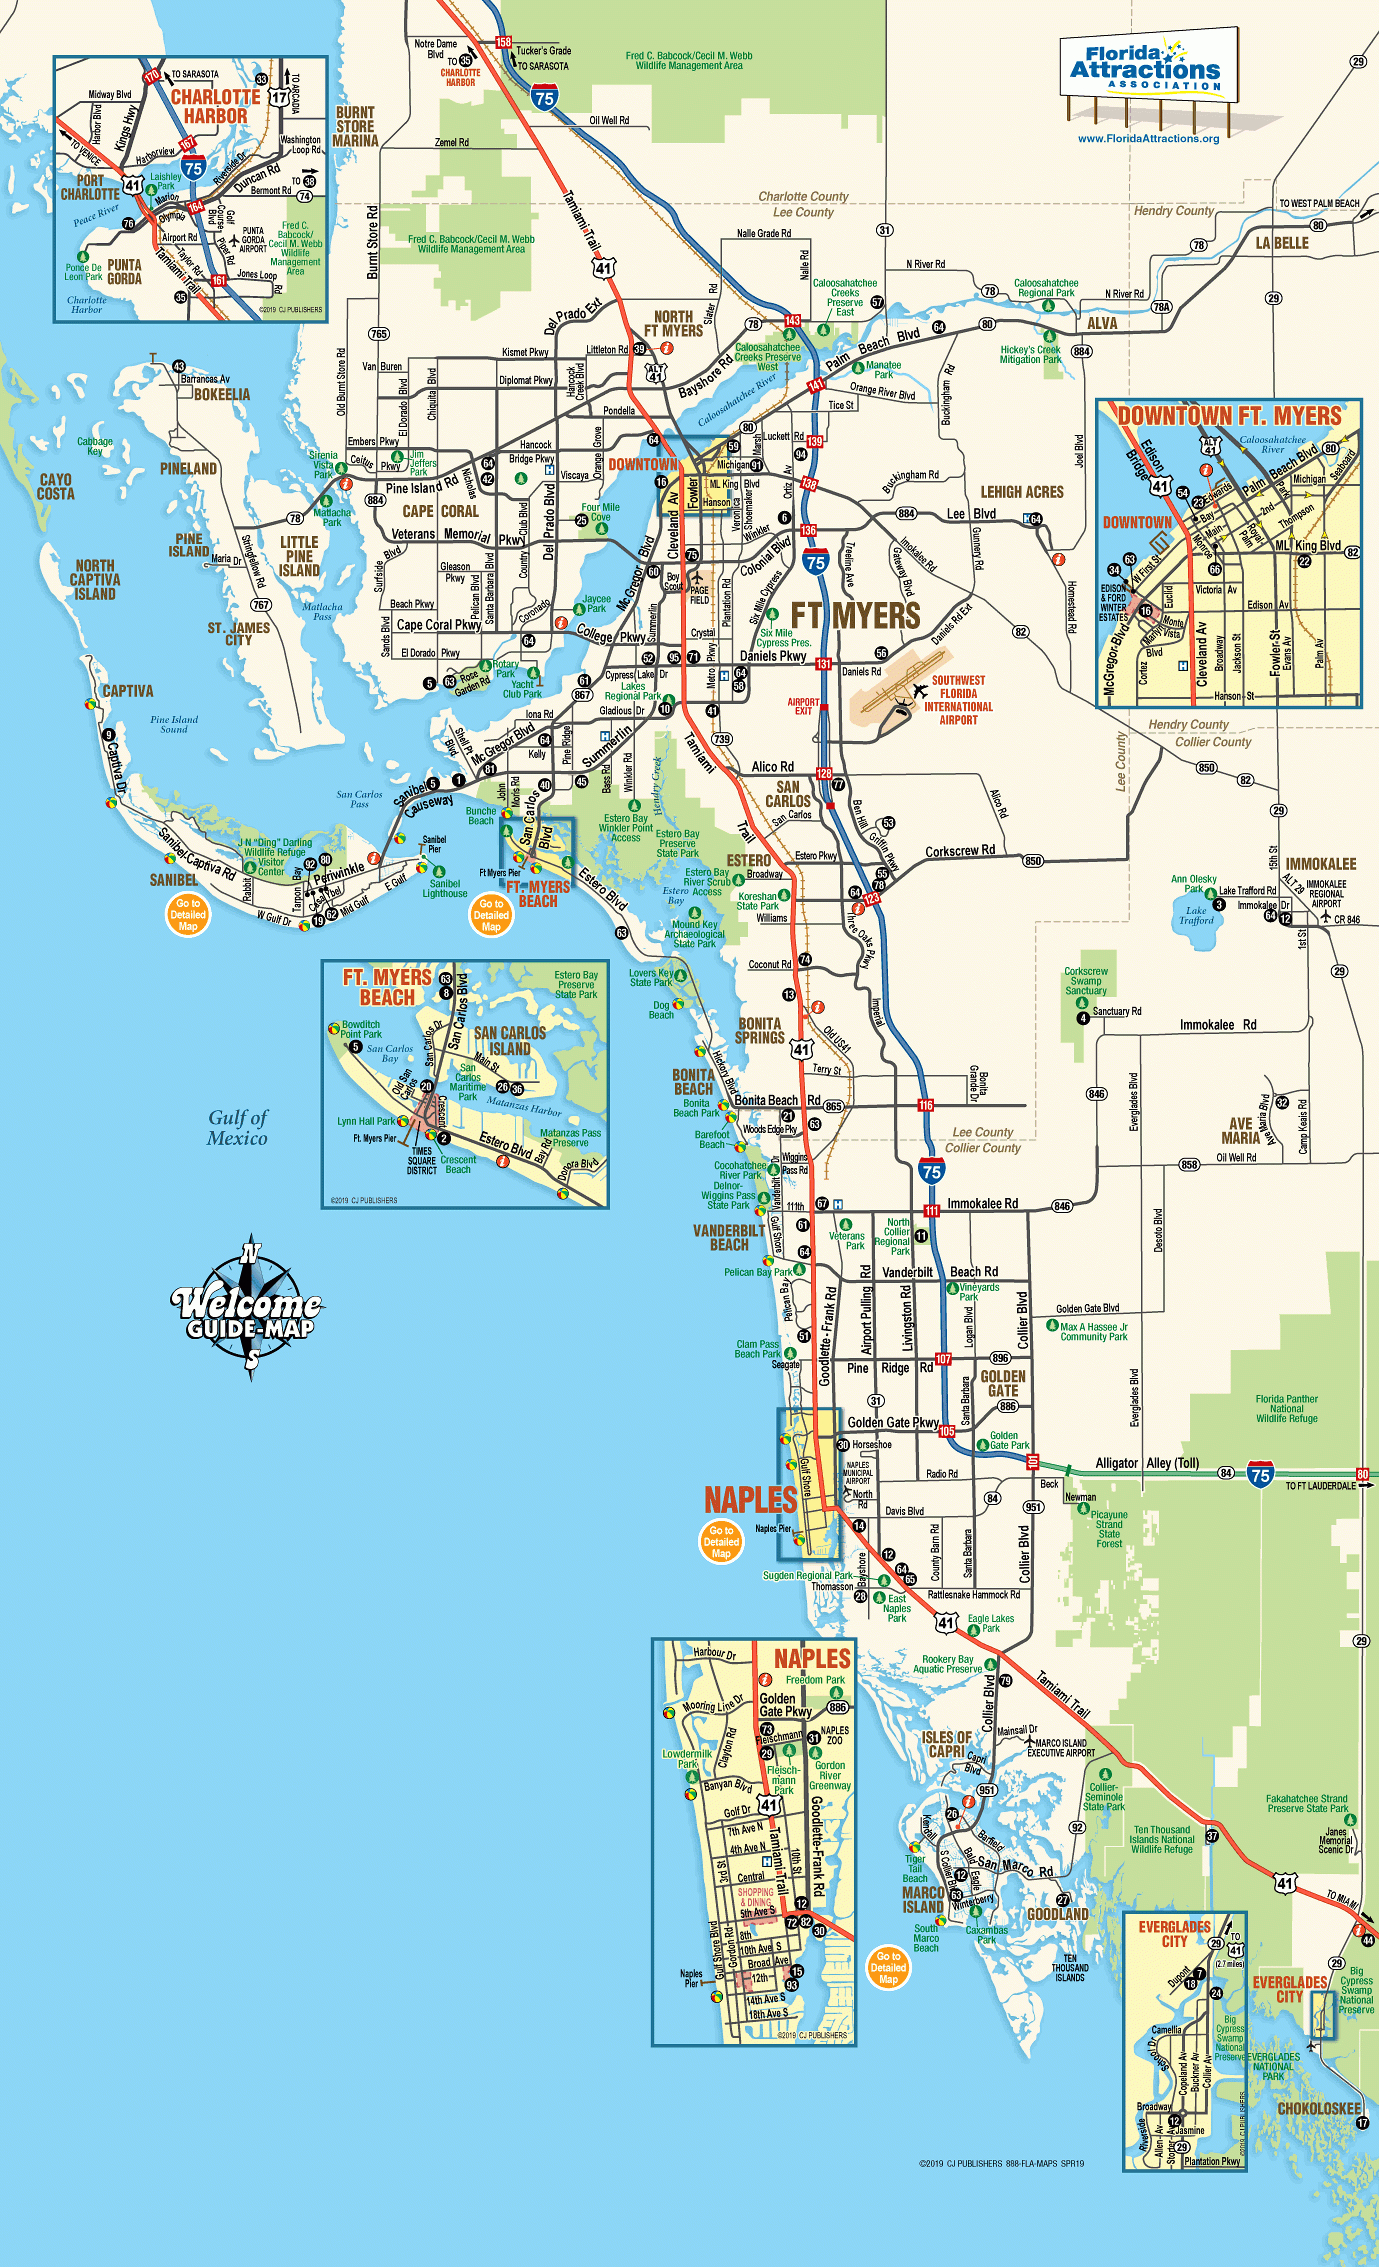 Map Of Southwest Florida - Welcome Guide-Map To Fort Myers &amp;amp; Naples - Google Maps Fort Myers Florida